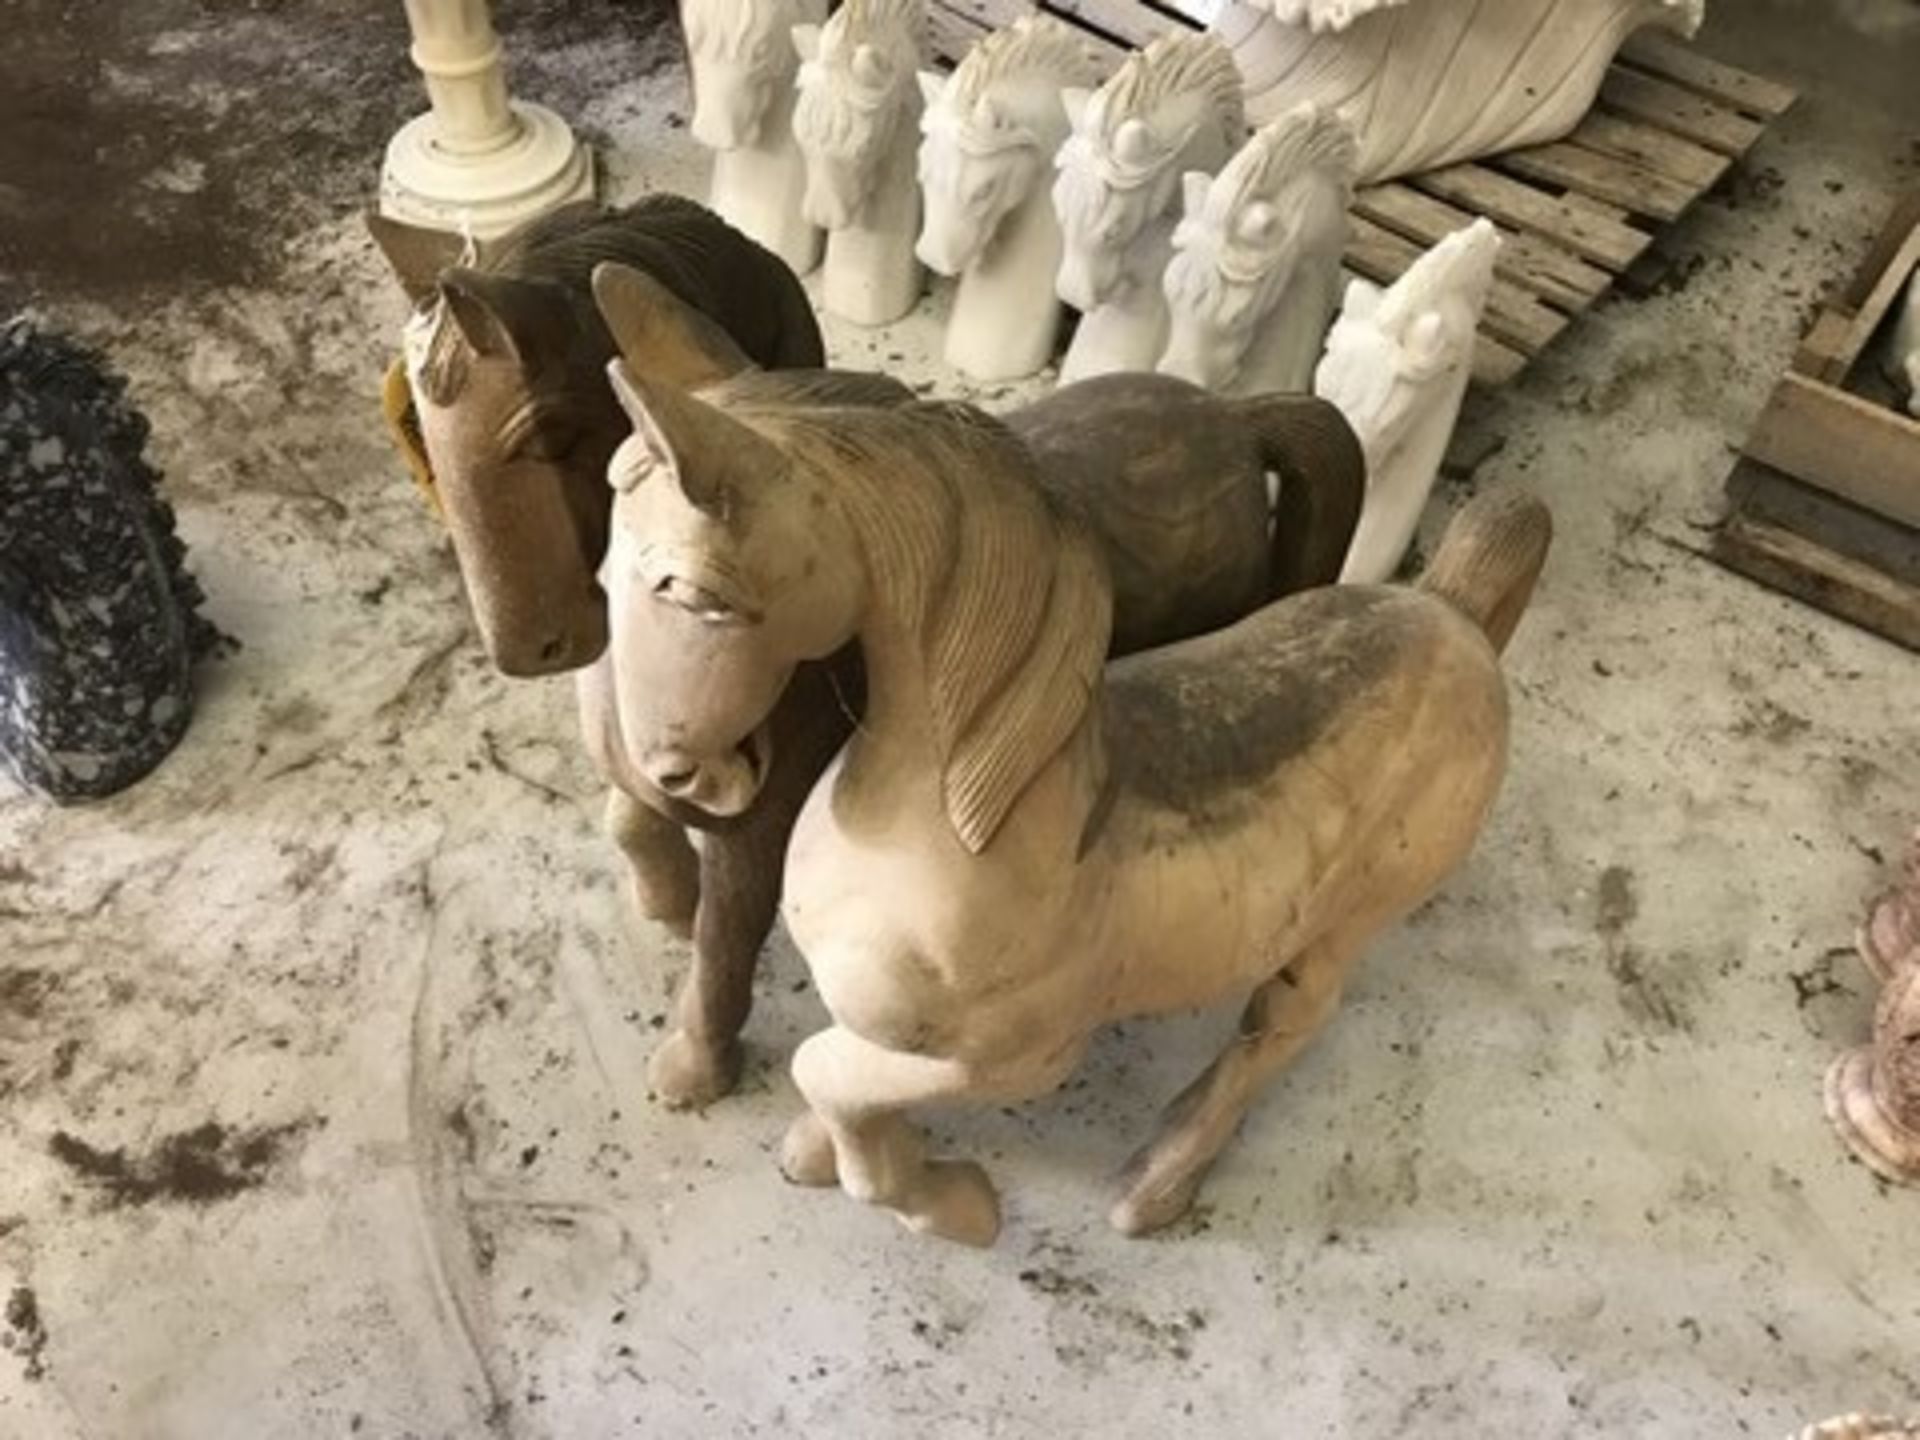 CARVED TEAK WOOD STATUES - HORSES - APPROXIMATELY 30''x24''x6'' (FOB LOXAHATCHEE, FL) - Image 2 of 2